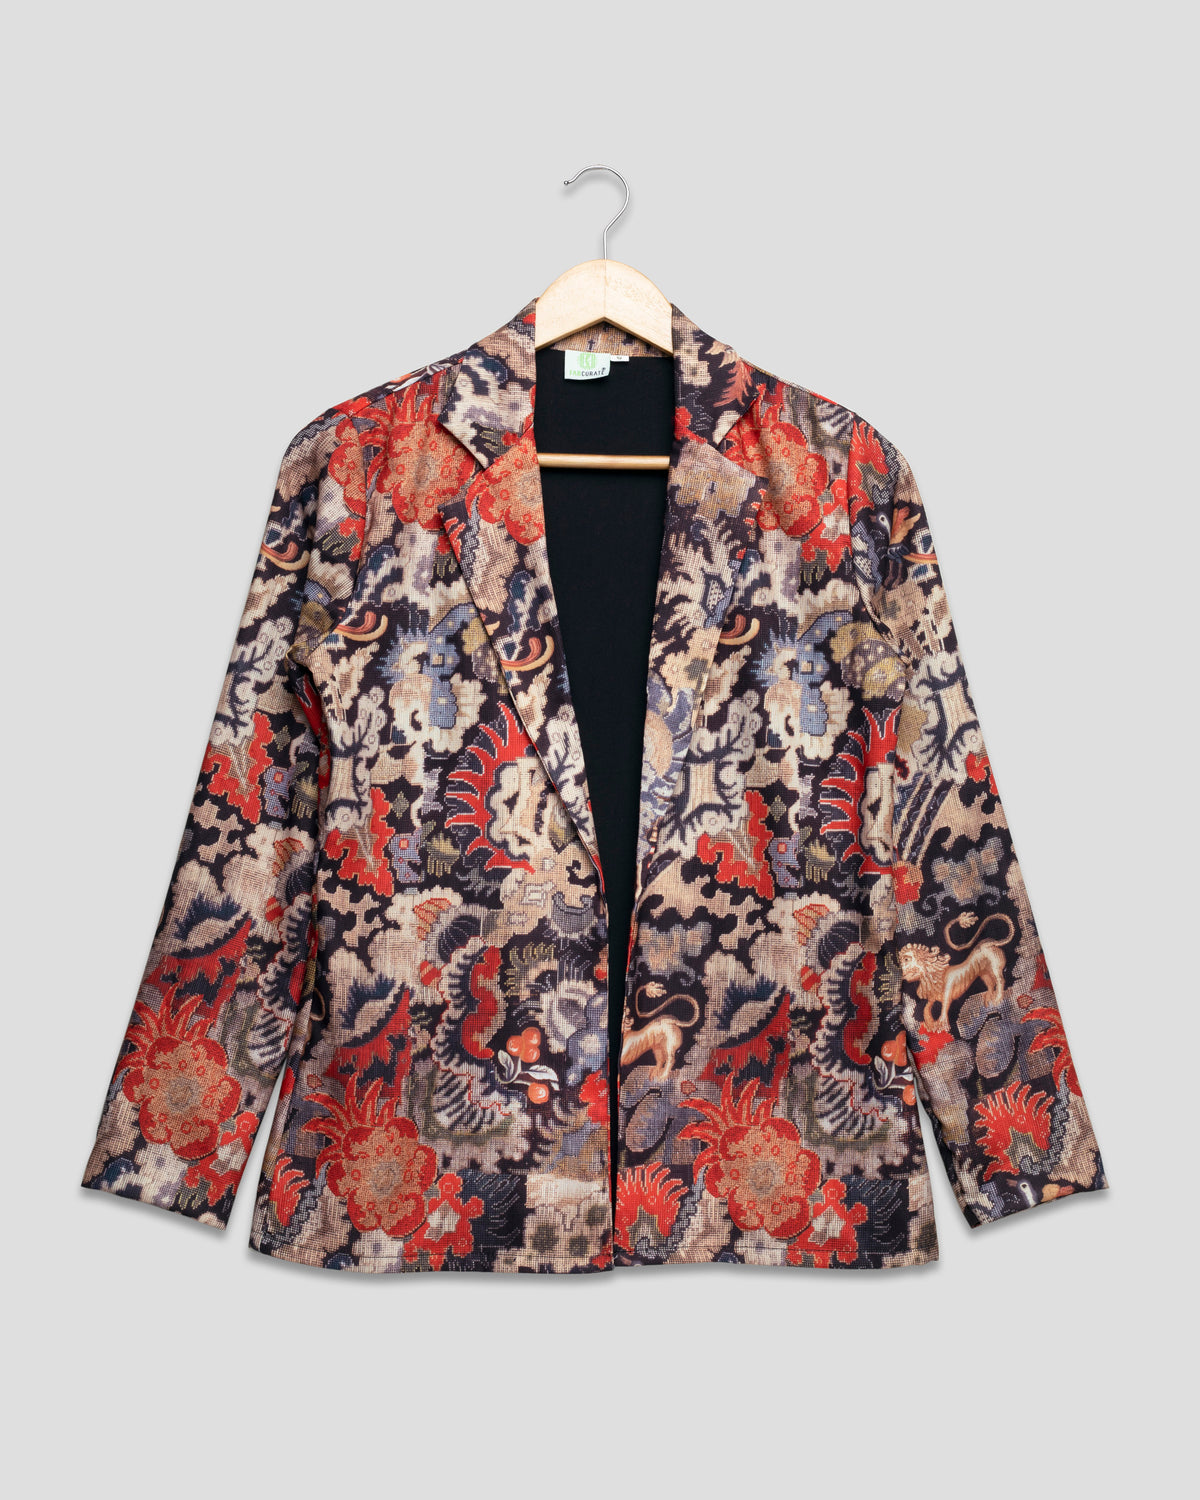 Stylish Women's Jacket For Every Occasion